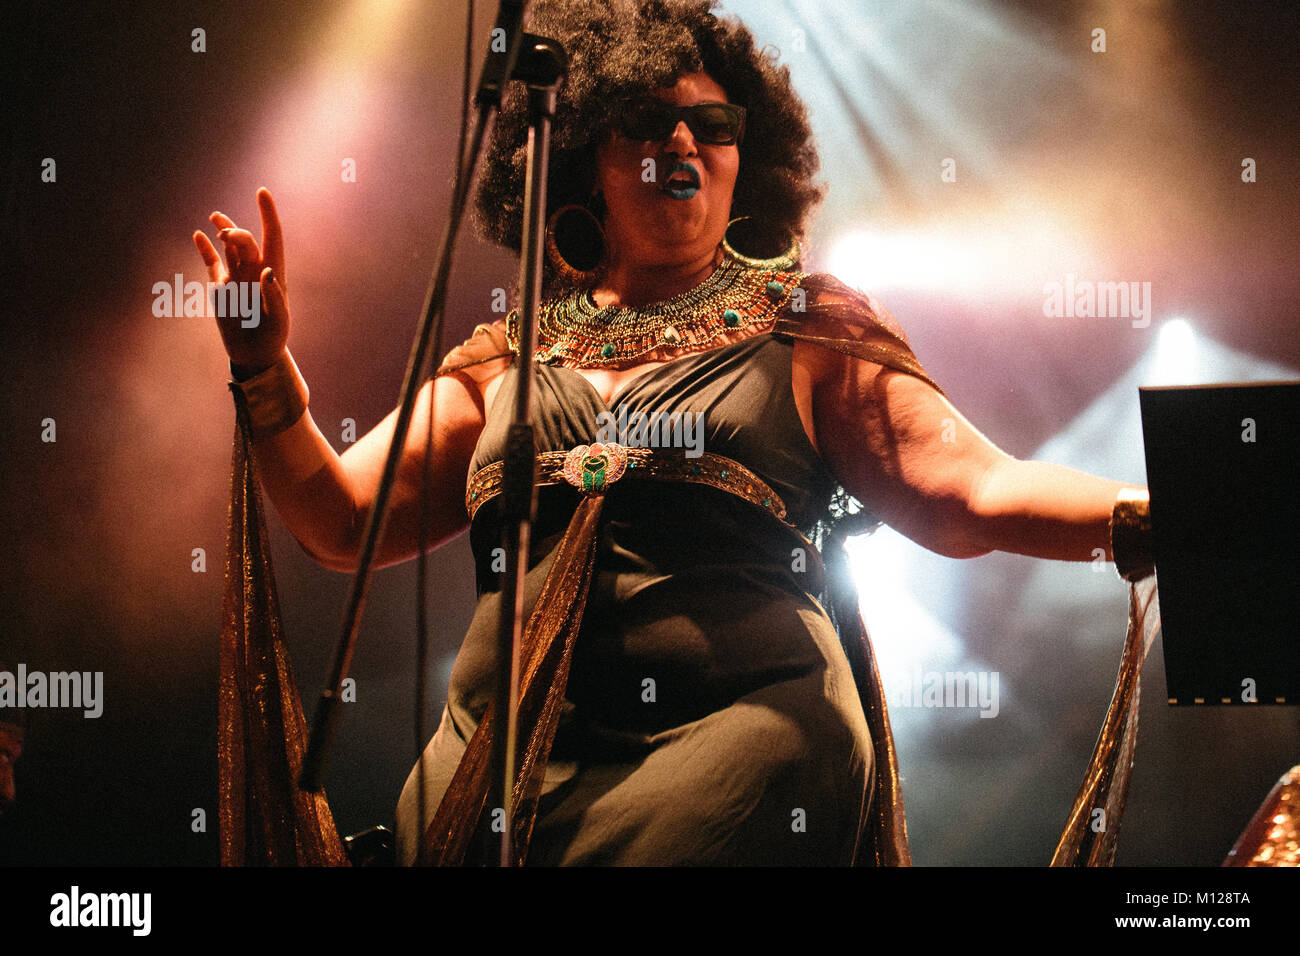 The American avant-garde jazz group Sun Ra Arkestra performs a live concert at the Polish music festival Off Festival 2015 in Katowice. Here vocalist Tara Middleton is pictured live on stage. Poland, 08/08 2015. Stock Photo